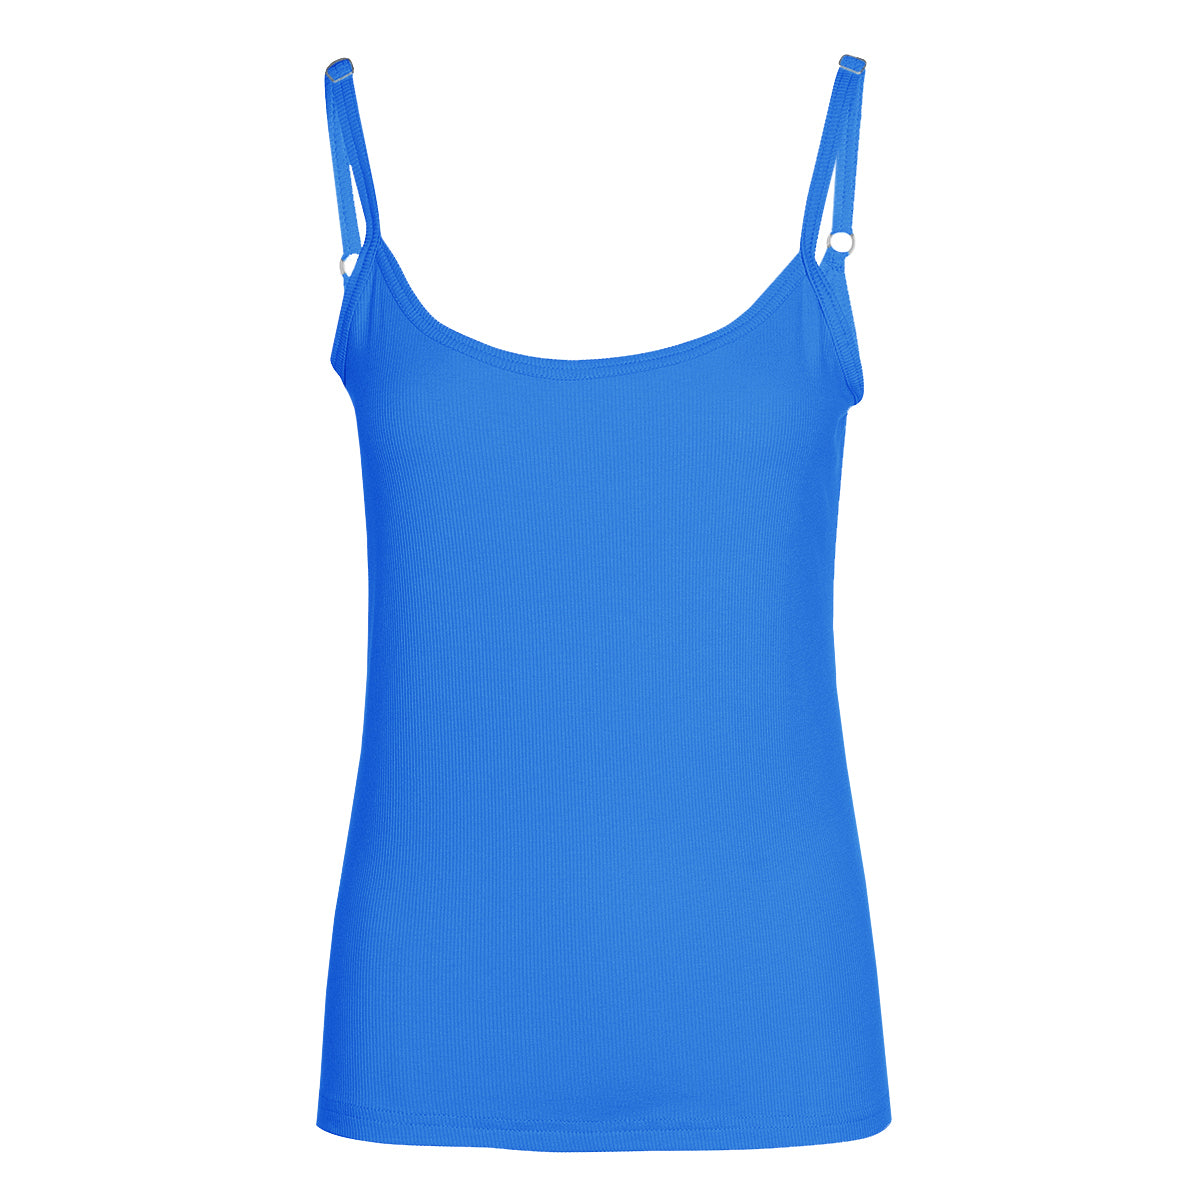 LUXZUZ // ONE TWO Adie Top Top 567 Brilliant Blue